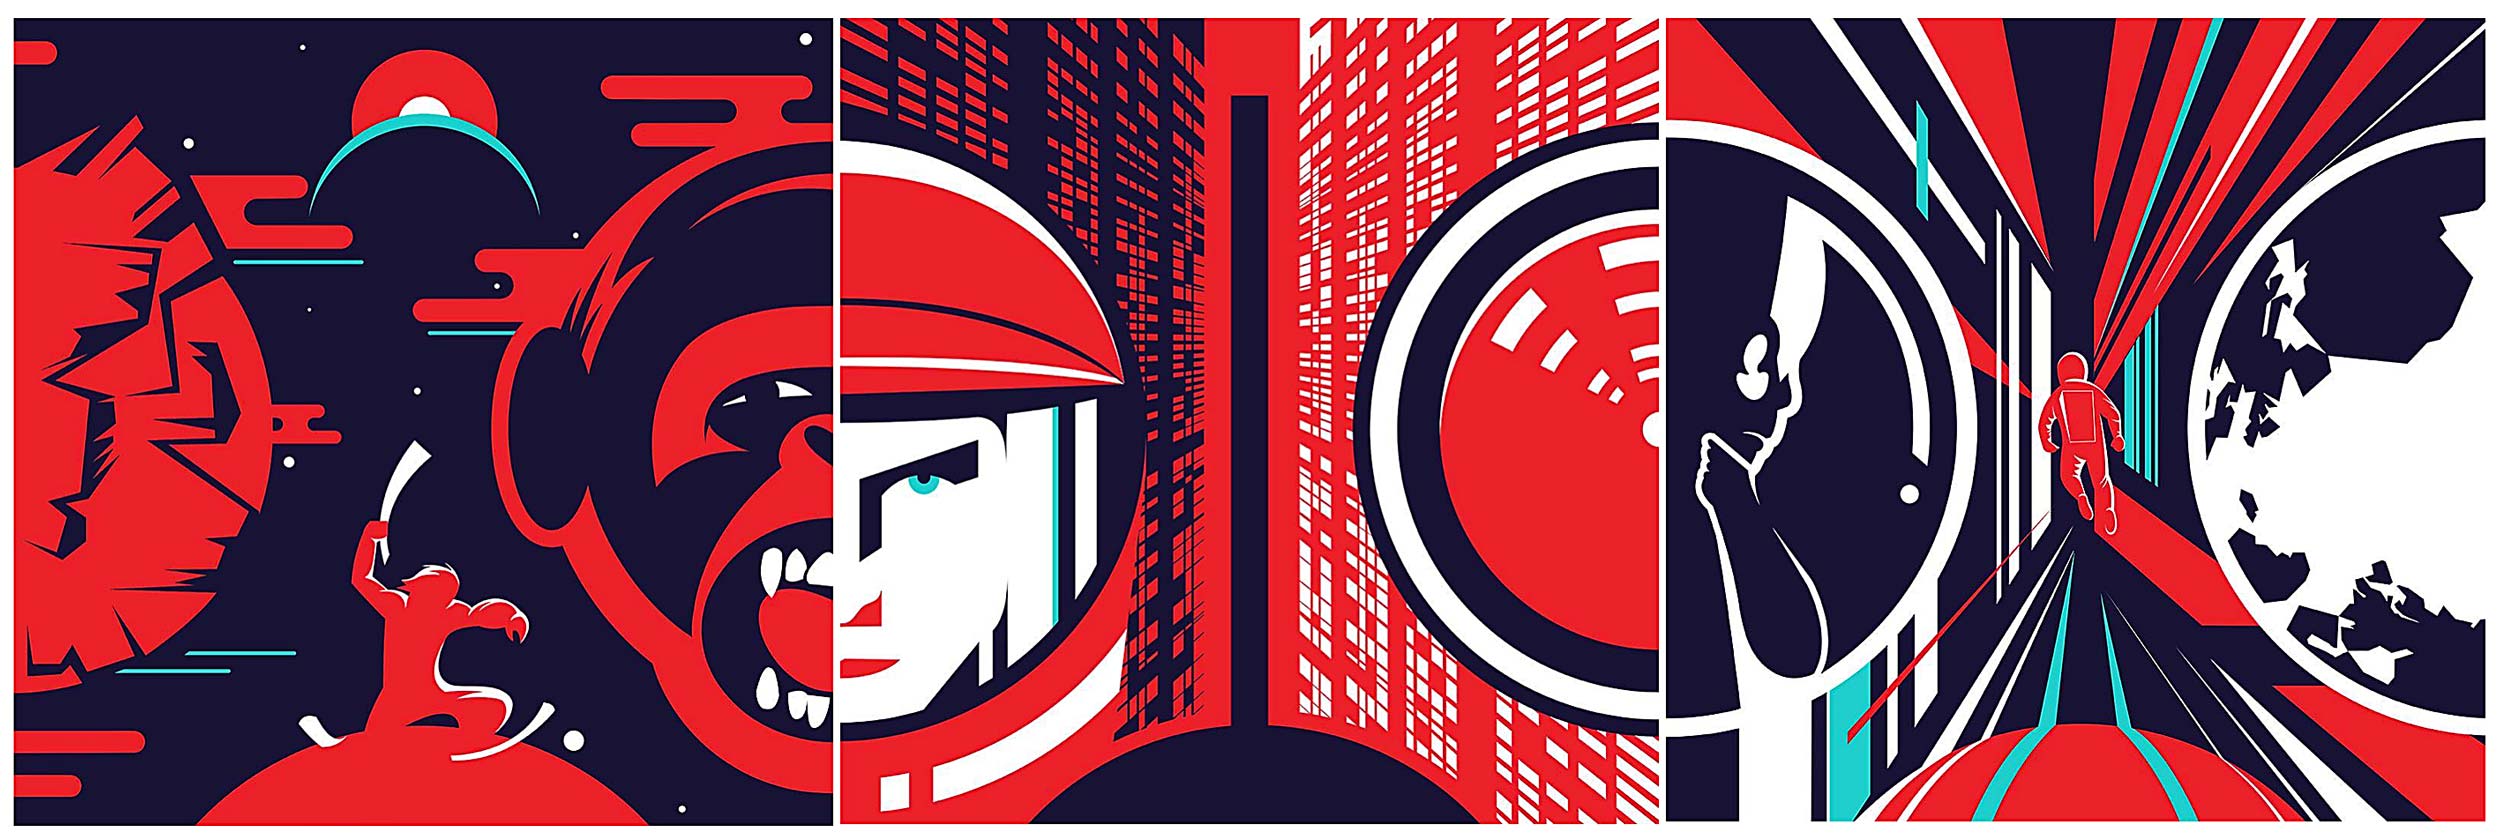 IRL - In Reel Life - A Space Odyssey illustration